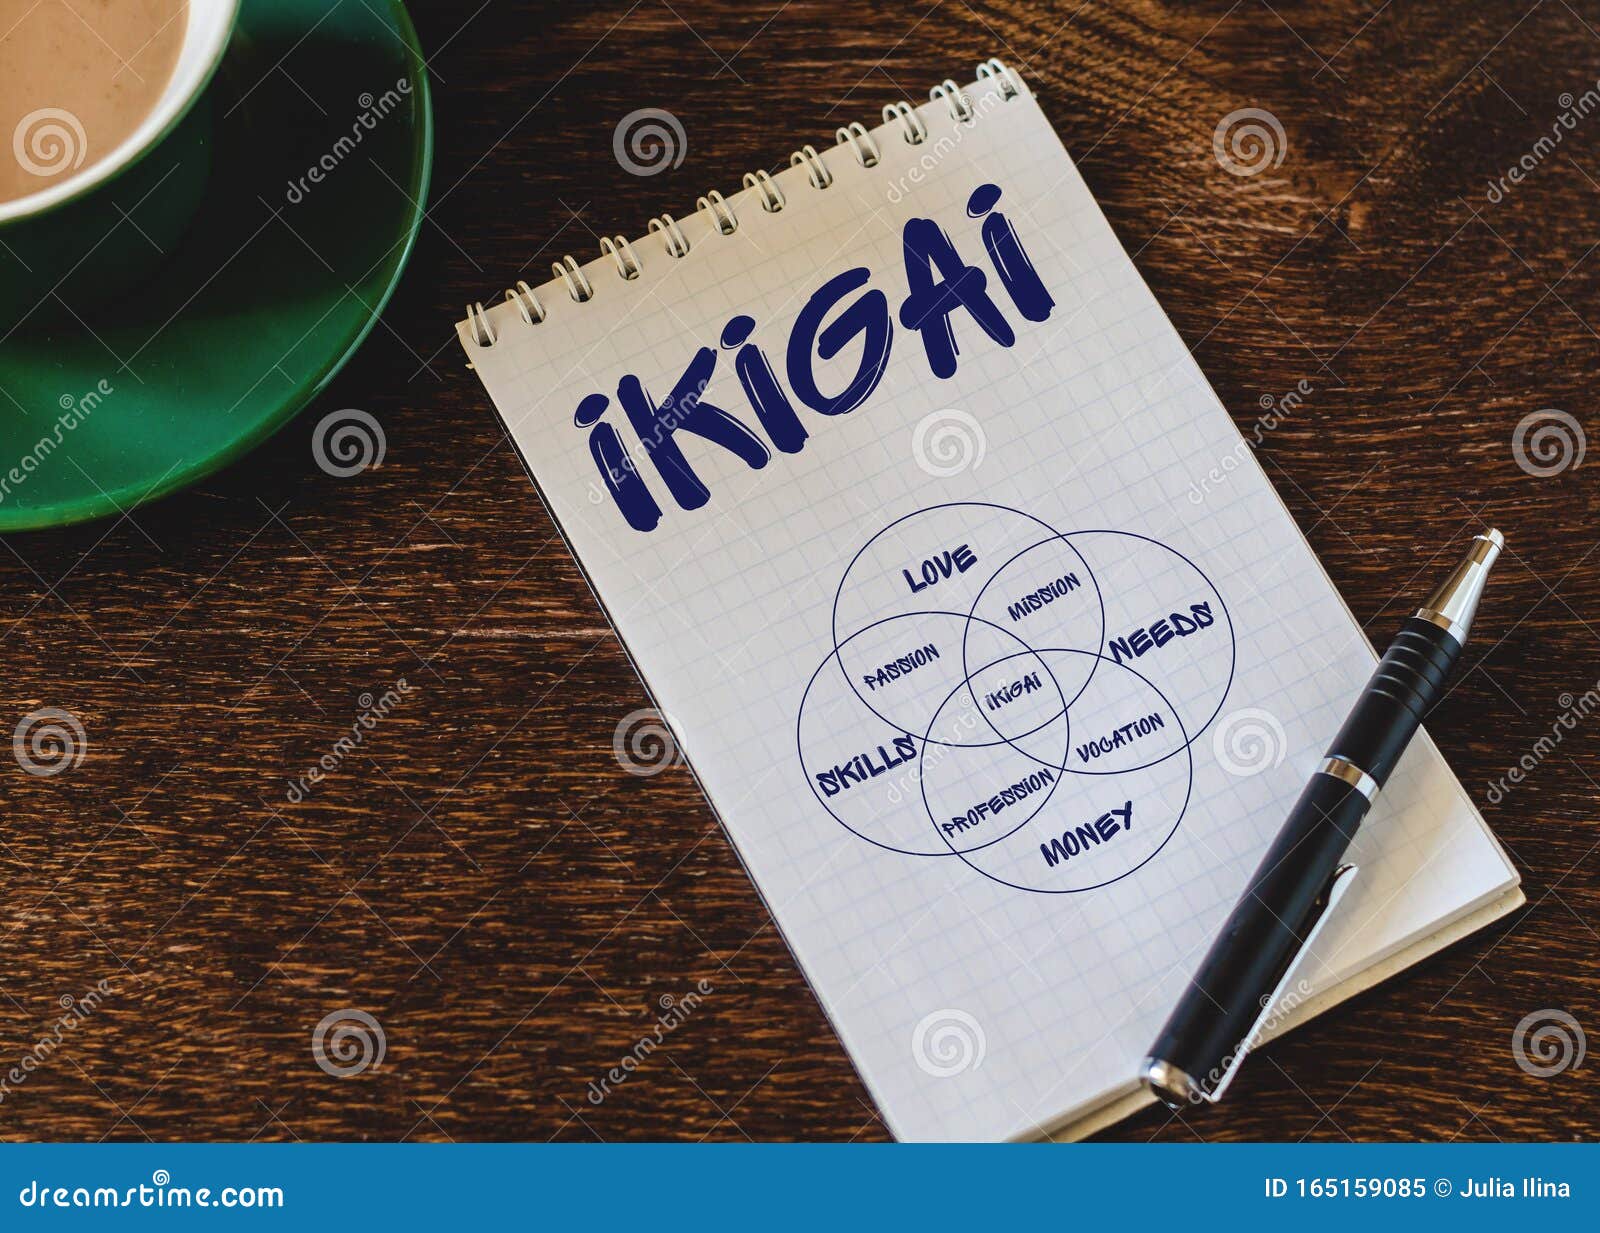 ikigai is a japanese concept reason for being of life purpose